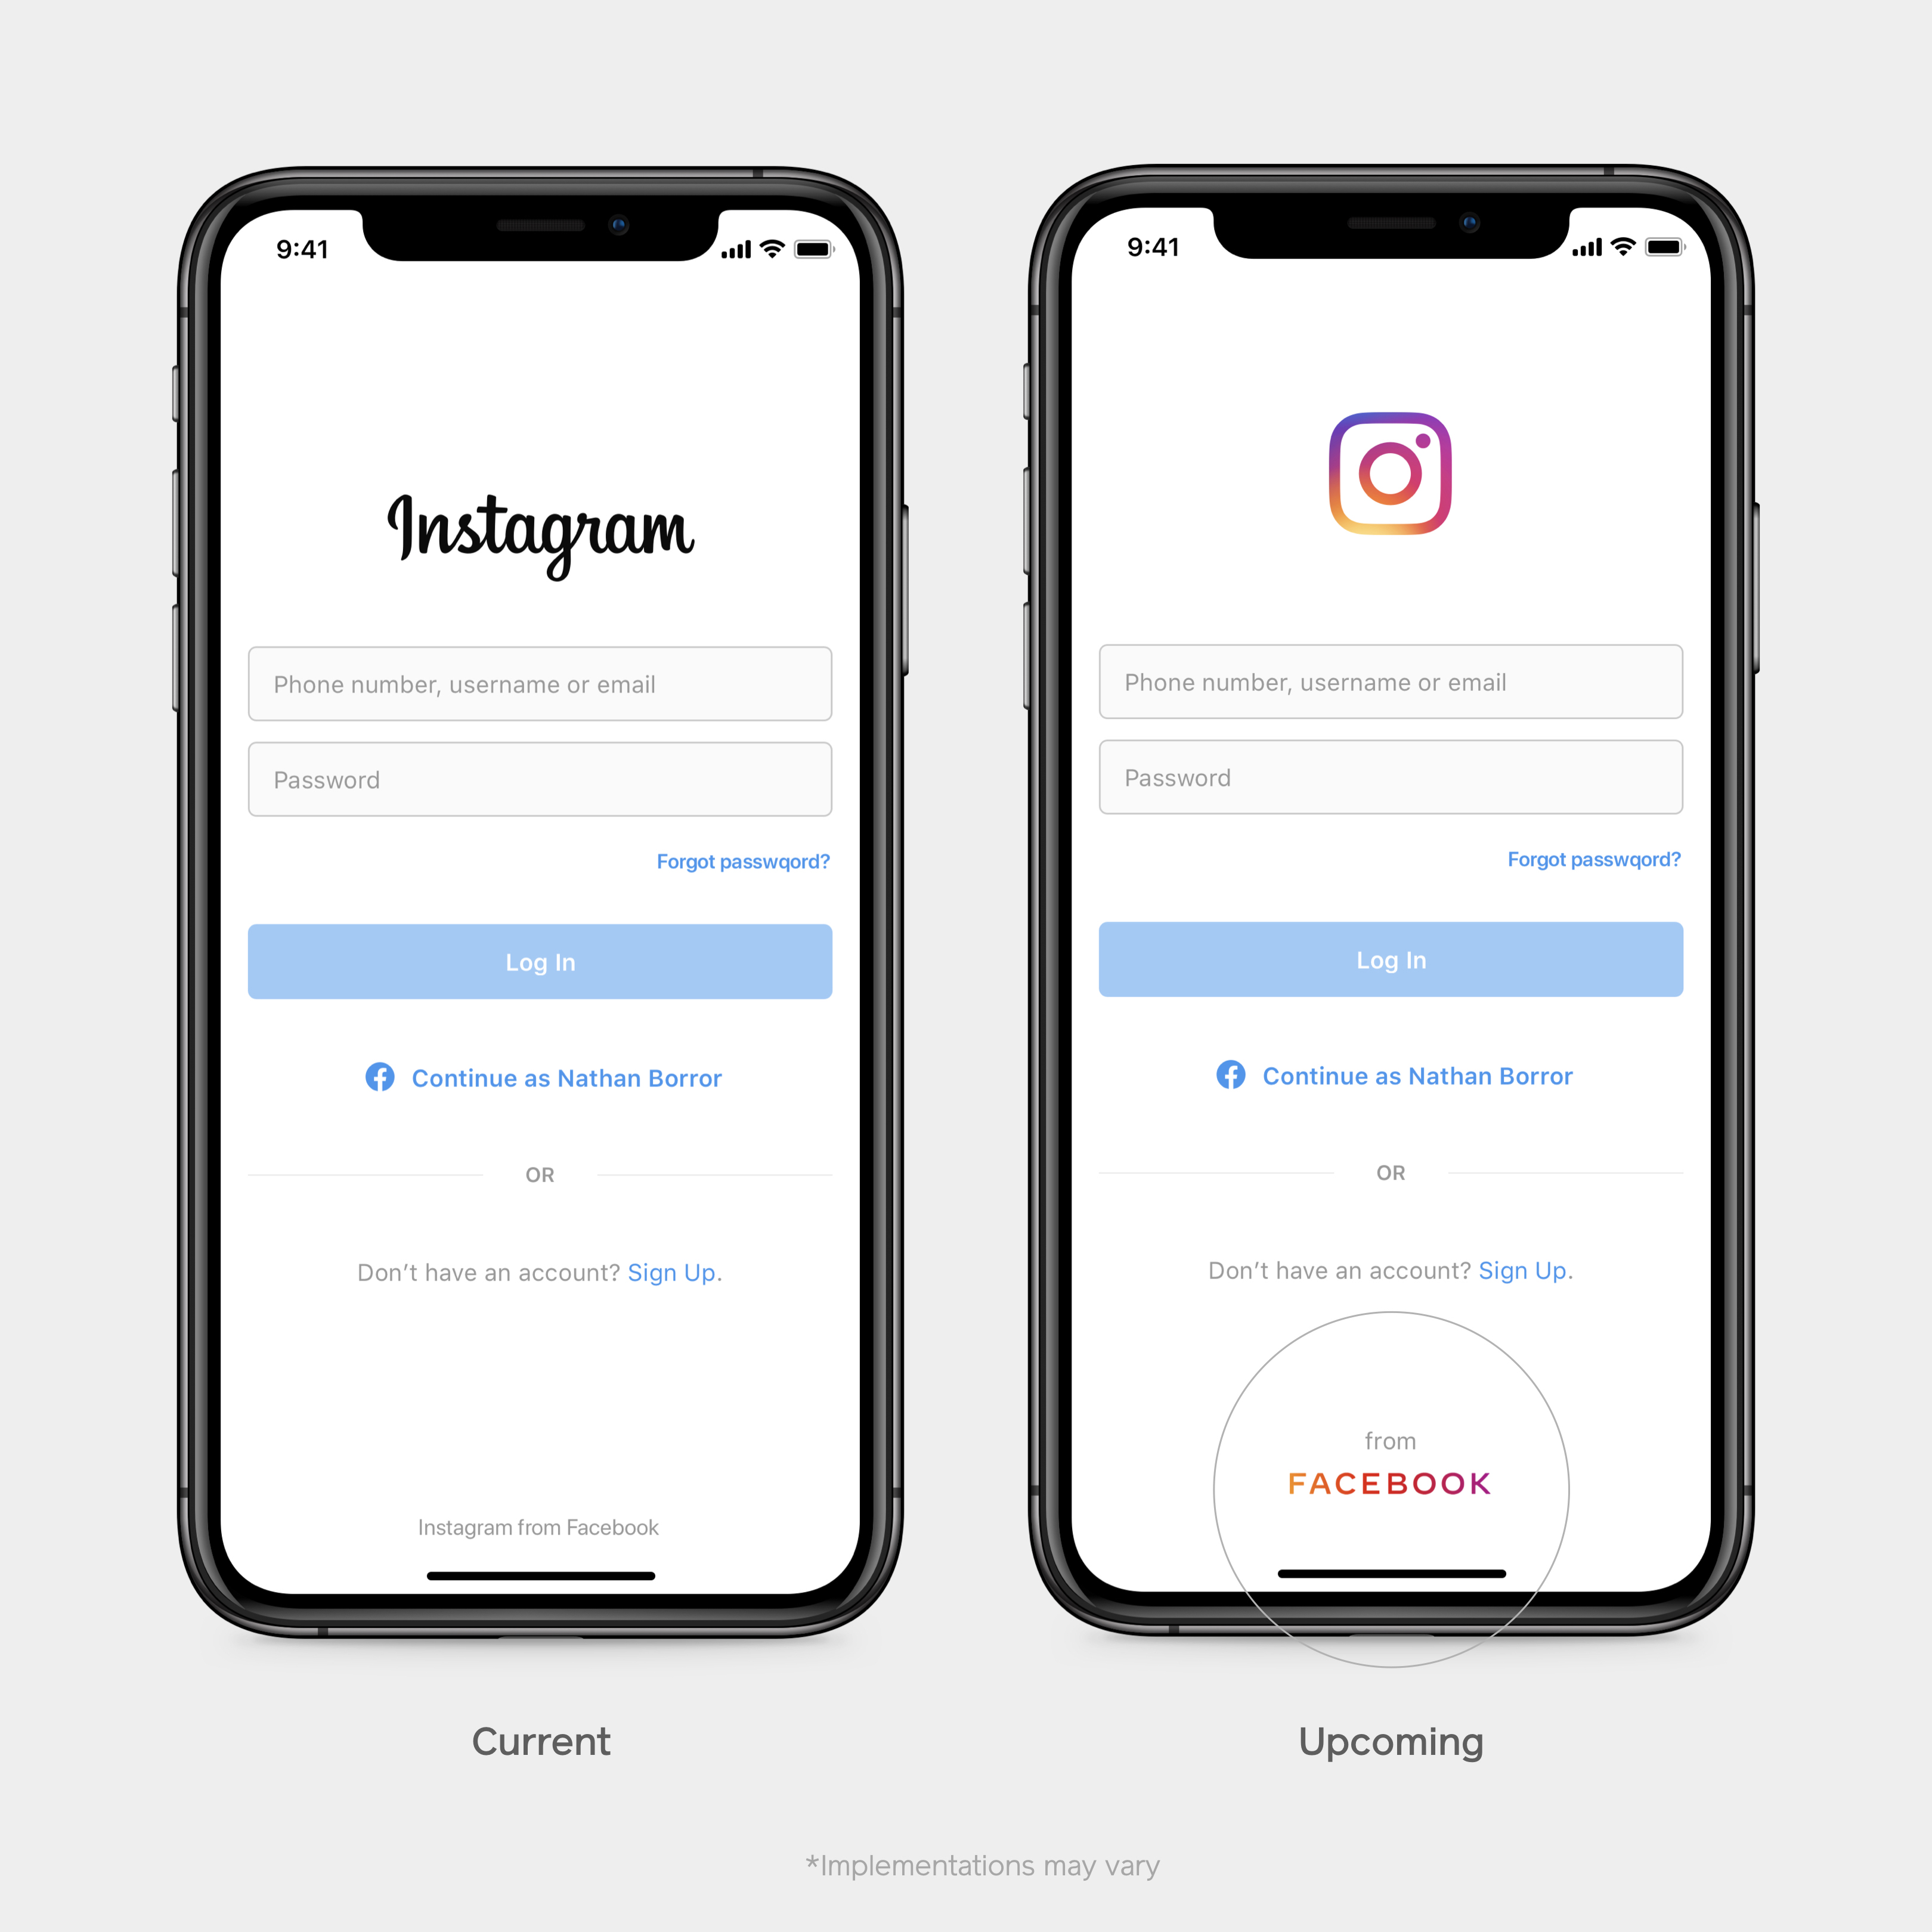 How Facebook's new corporate logo will appear on Instagram